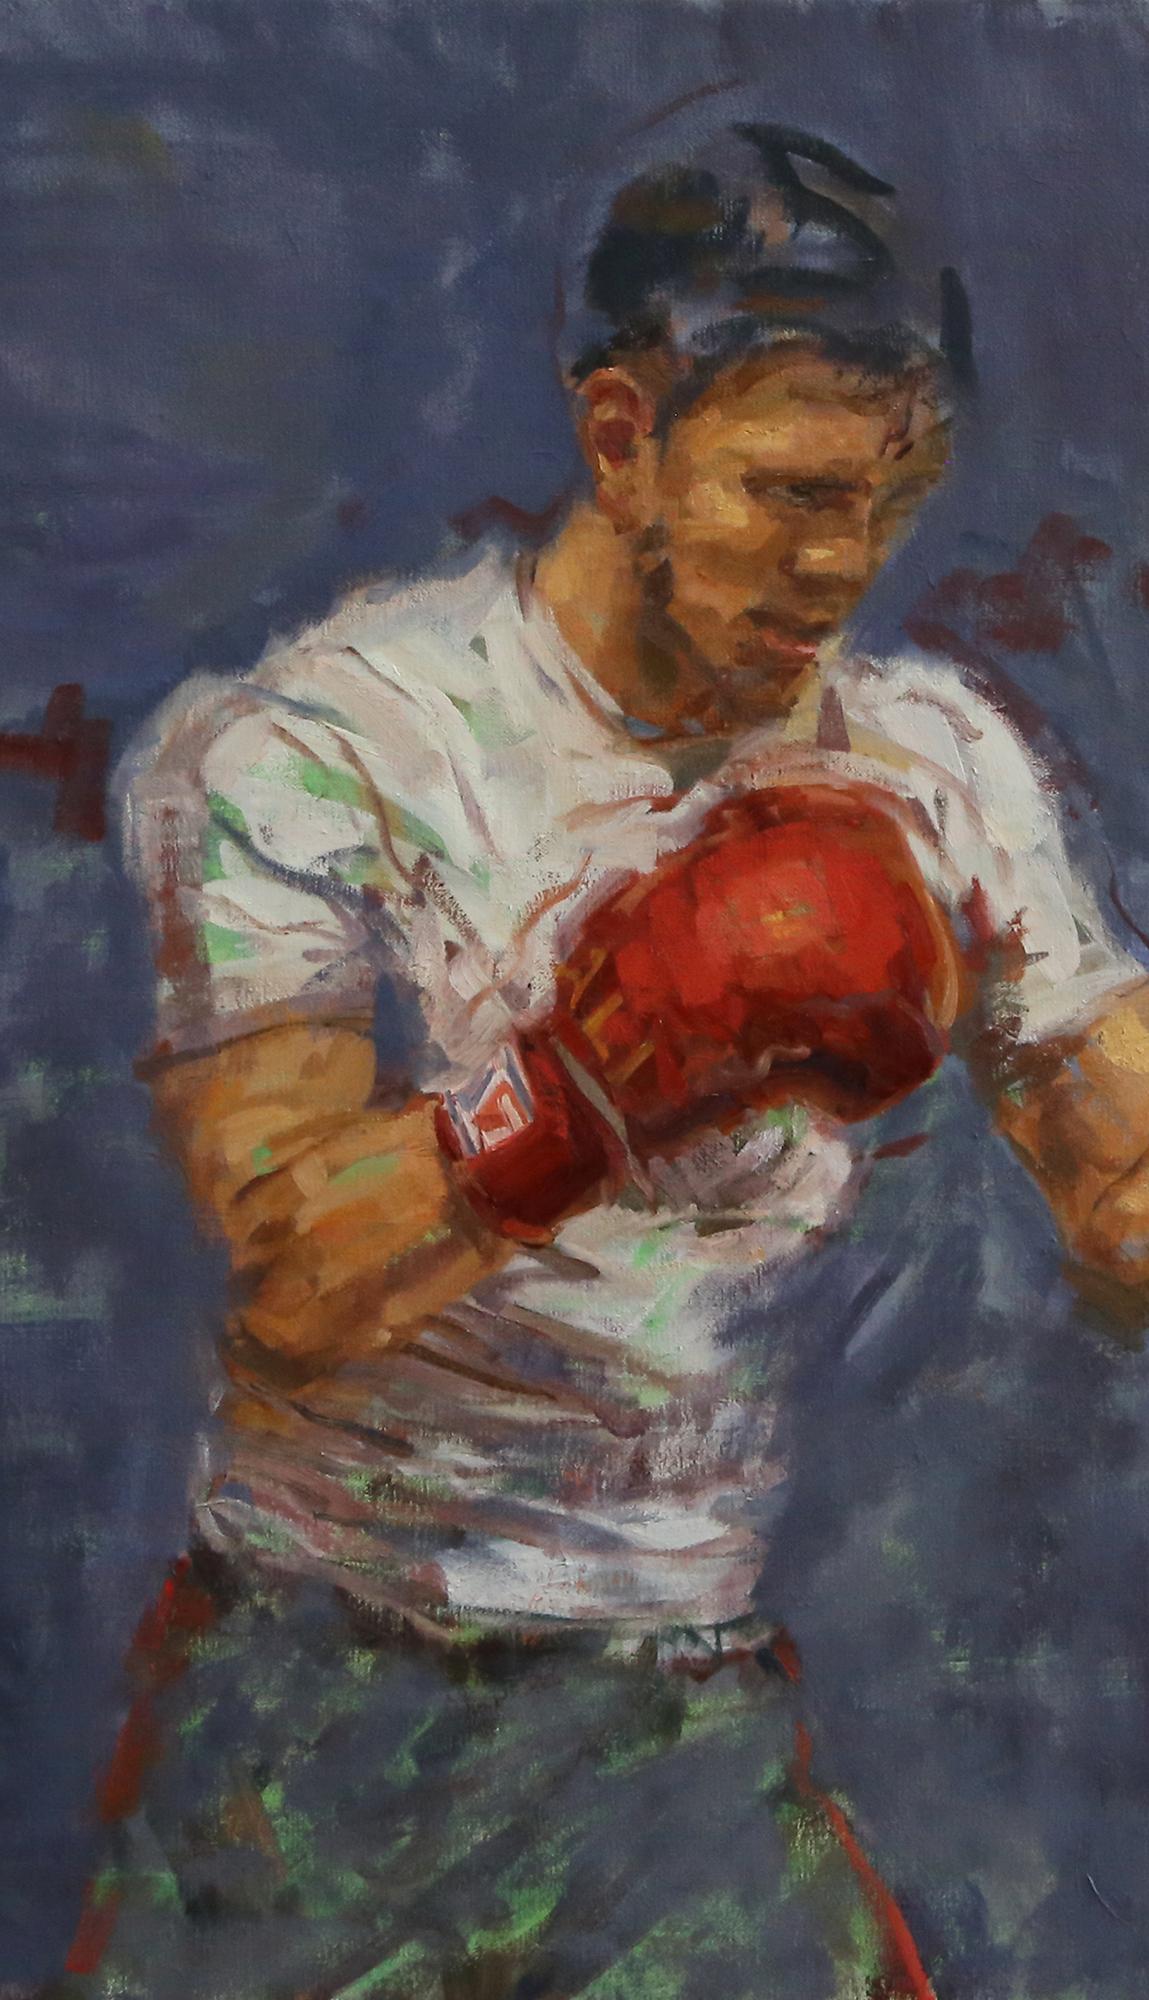 boxing paintings